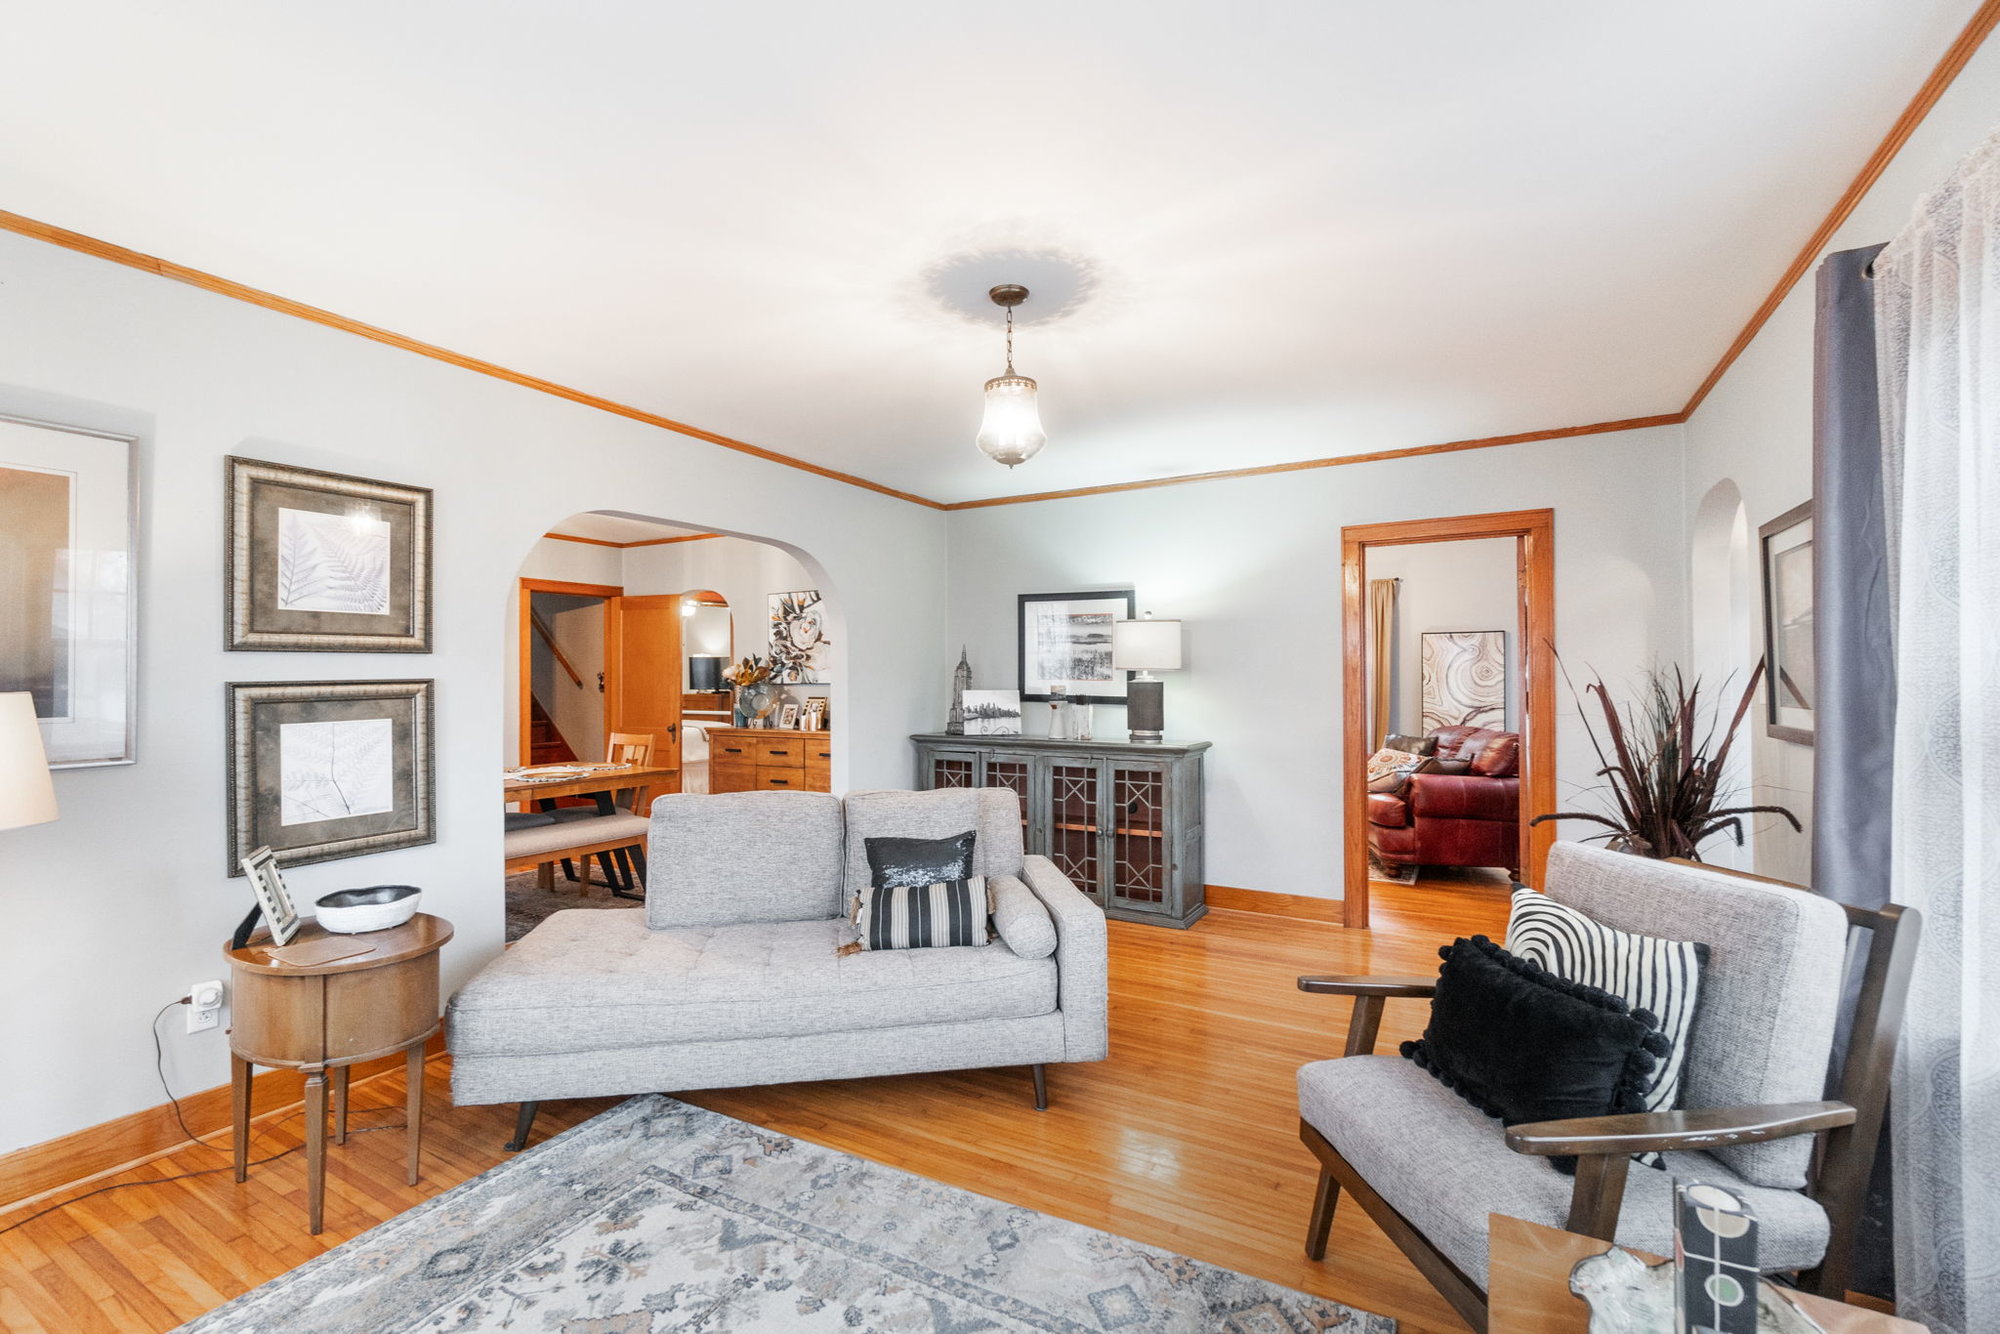 discover charm and character in this 1930's brick beauty in cedar falls iowa